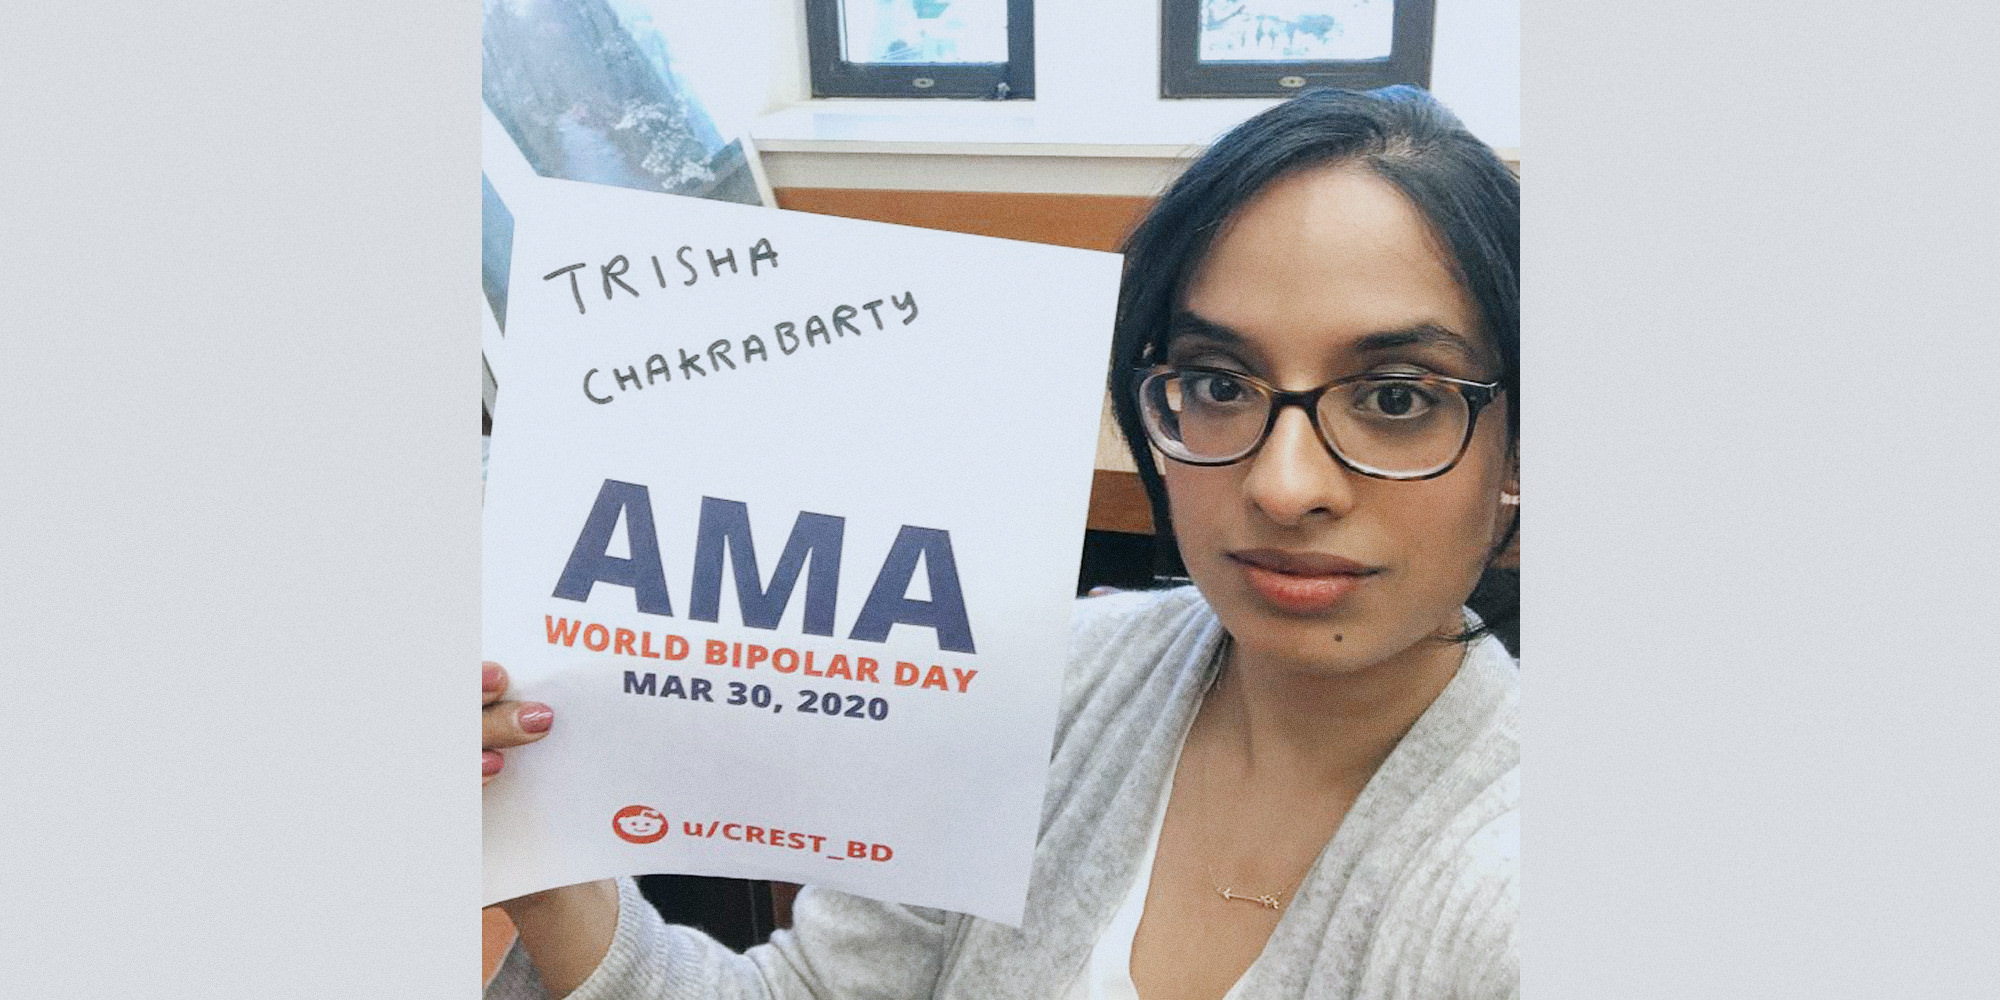 Trisha sitting in an office, looking upwards at the camera and holding a proof sign.